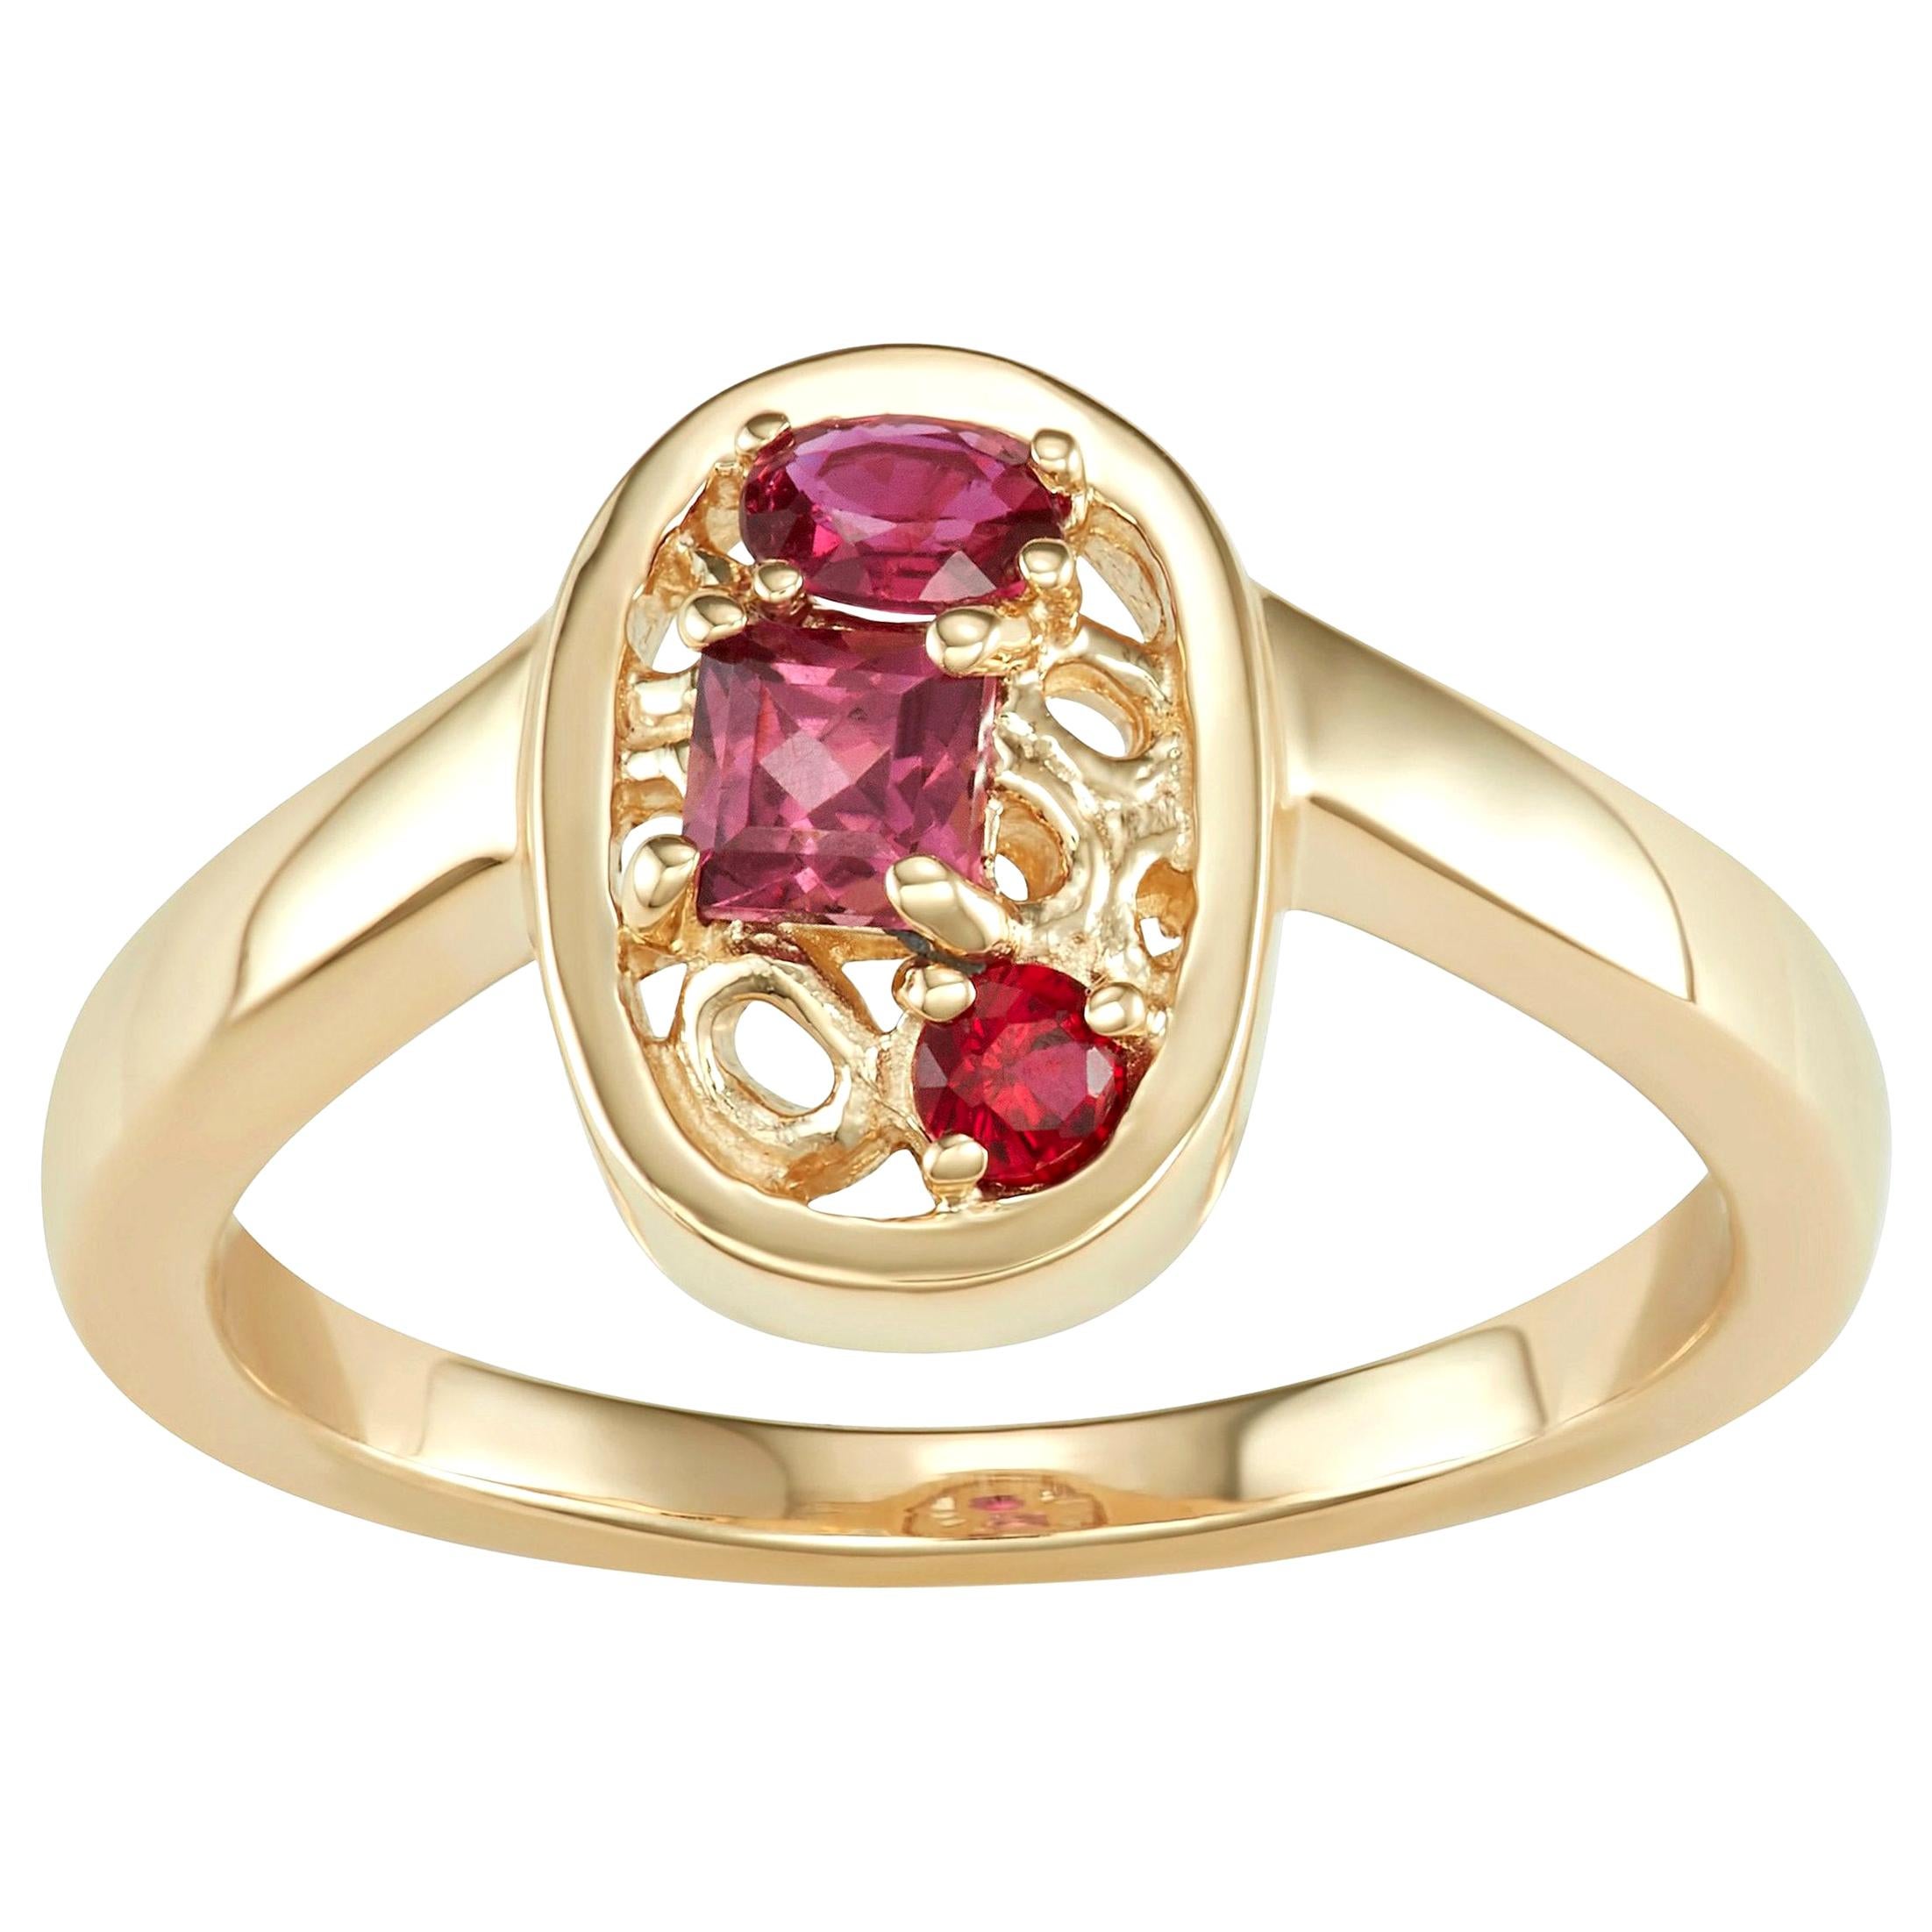 14 Karat Yellow Gold with Ruby and Rhodolite Stones Cluster Ring